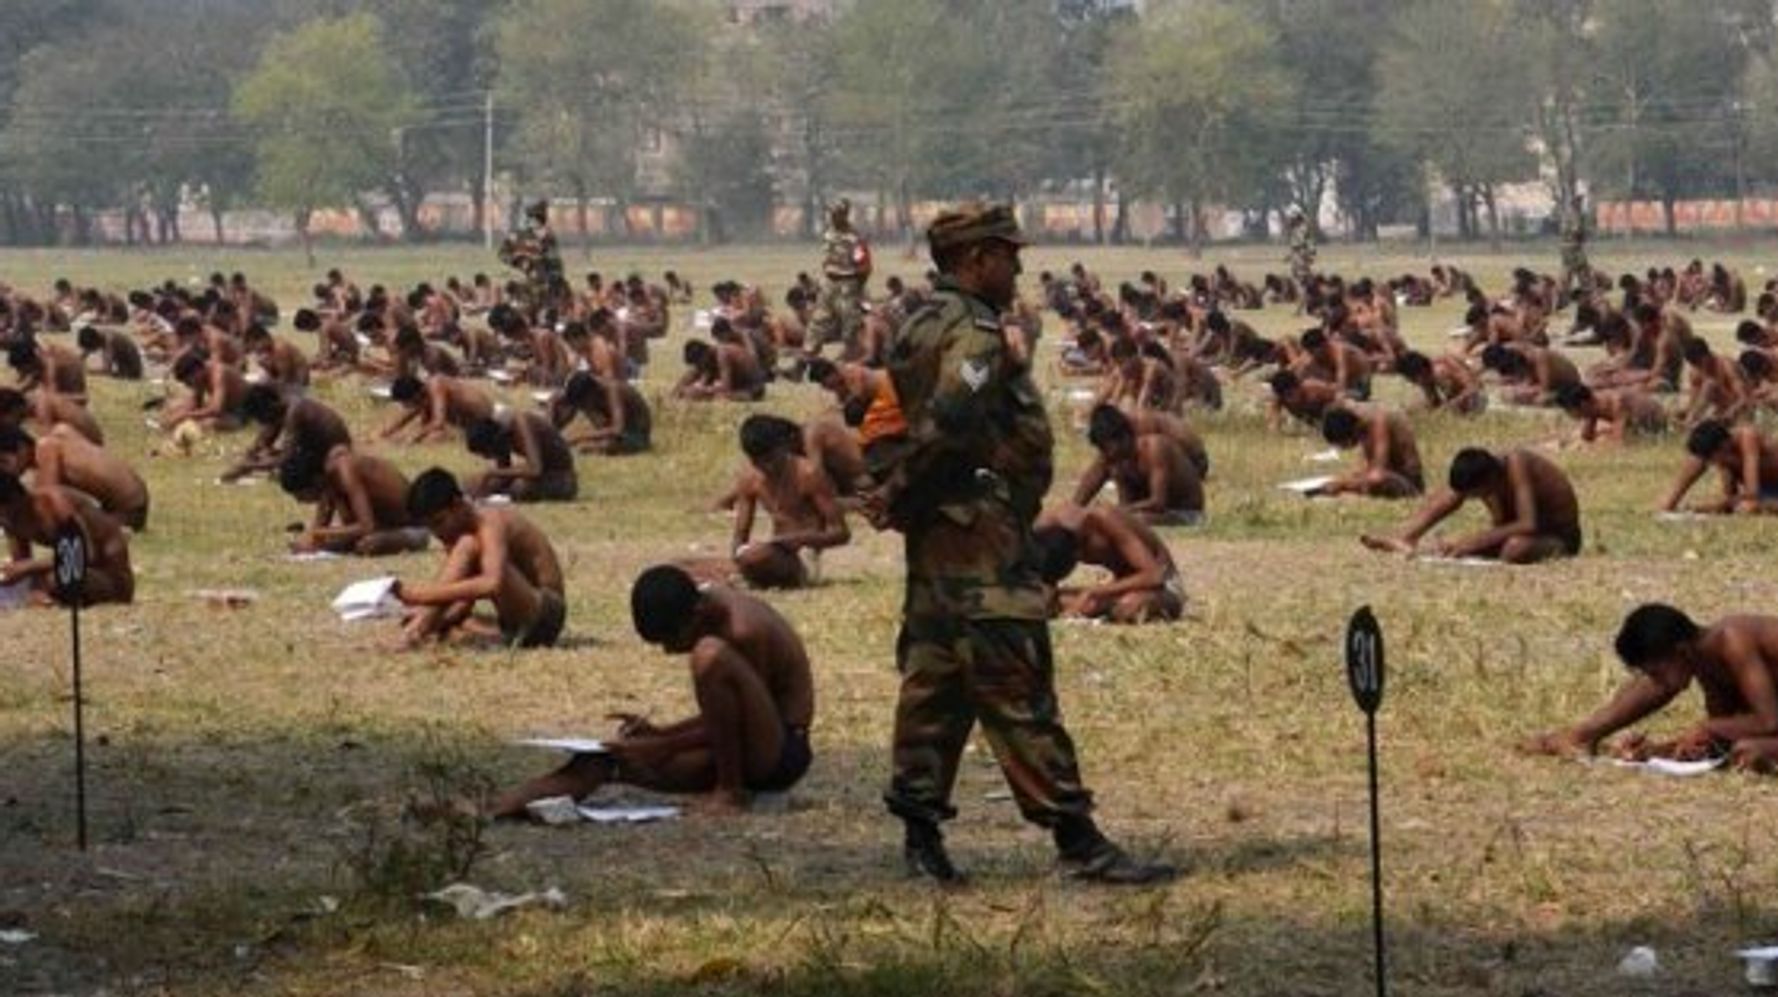 Men Taking An Army Exam Stripped Down To Their Undies To Prevent